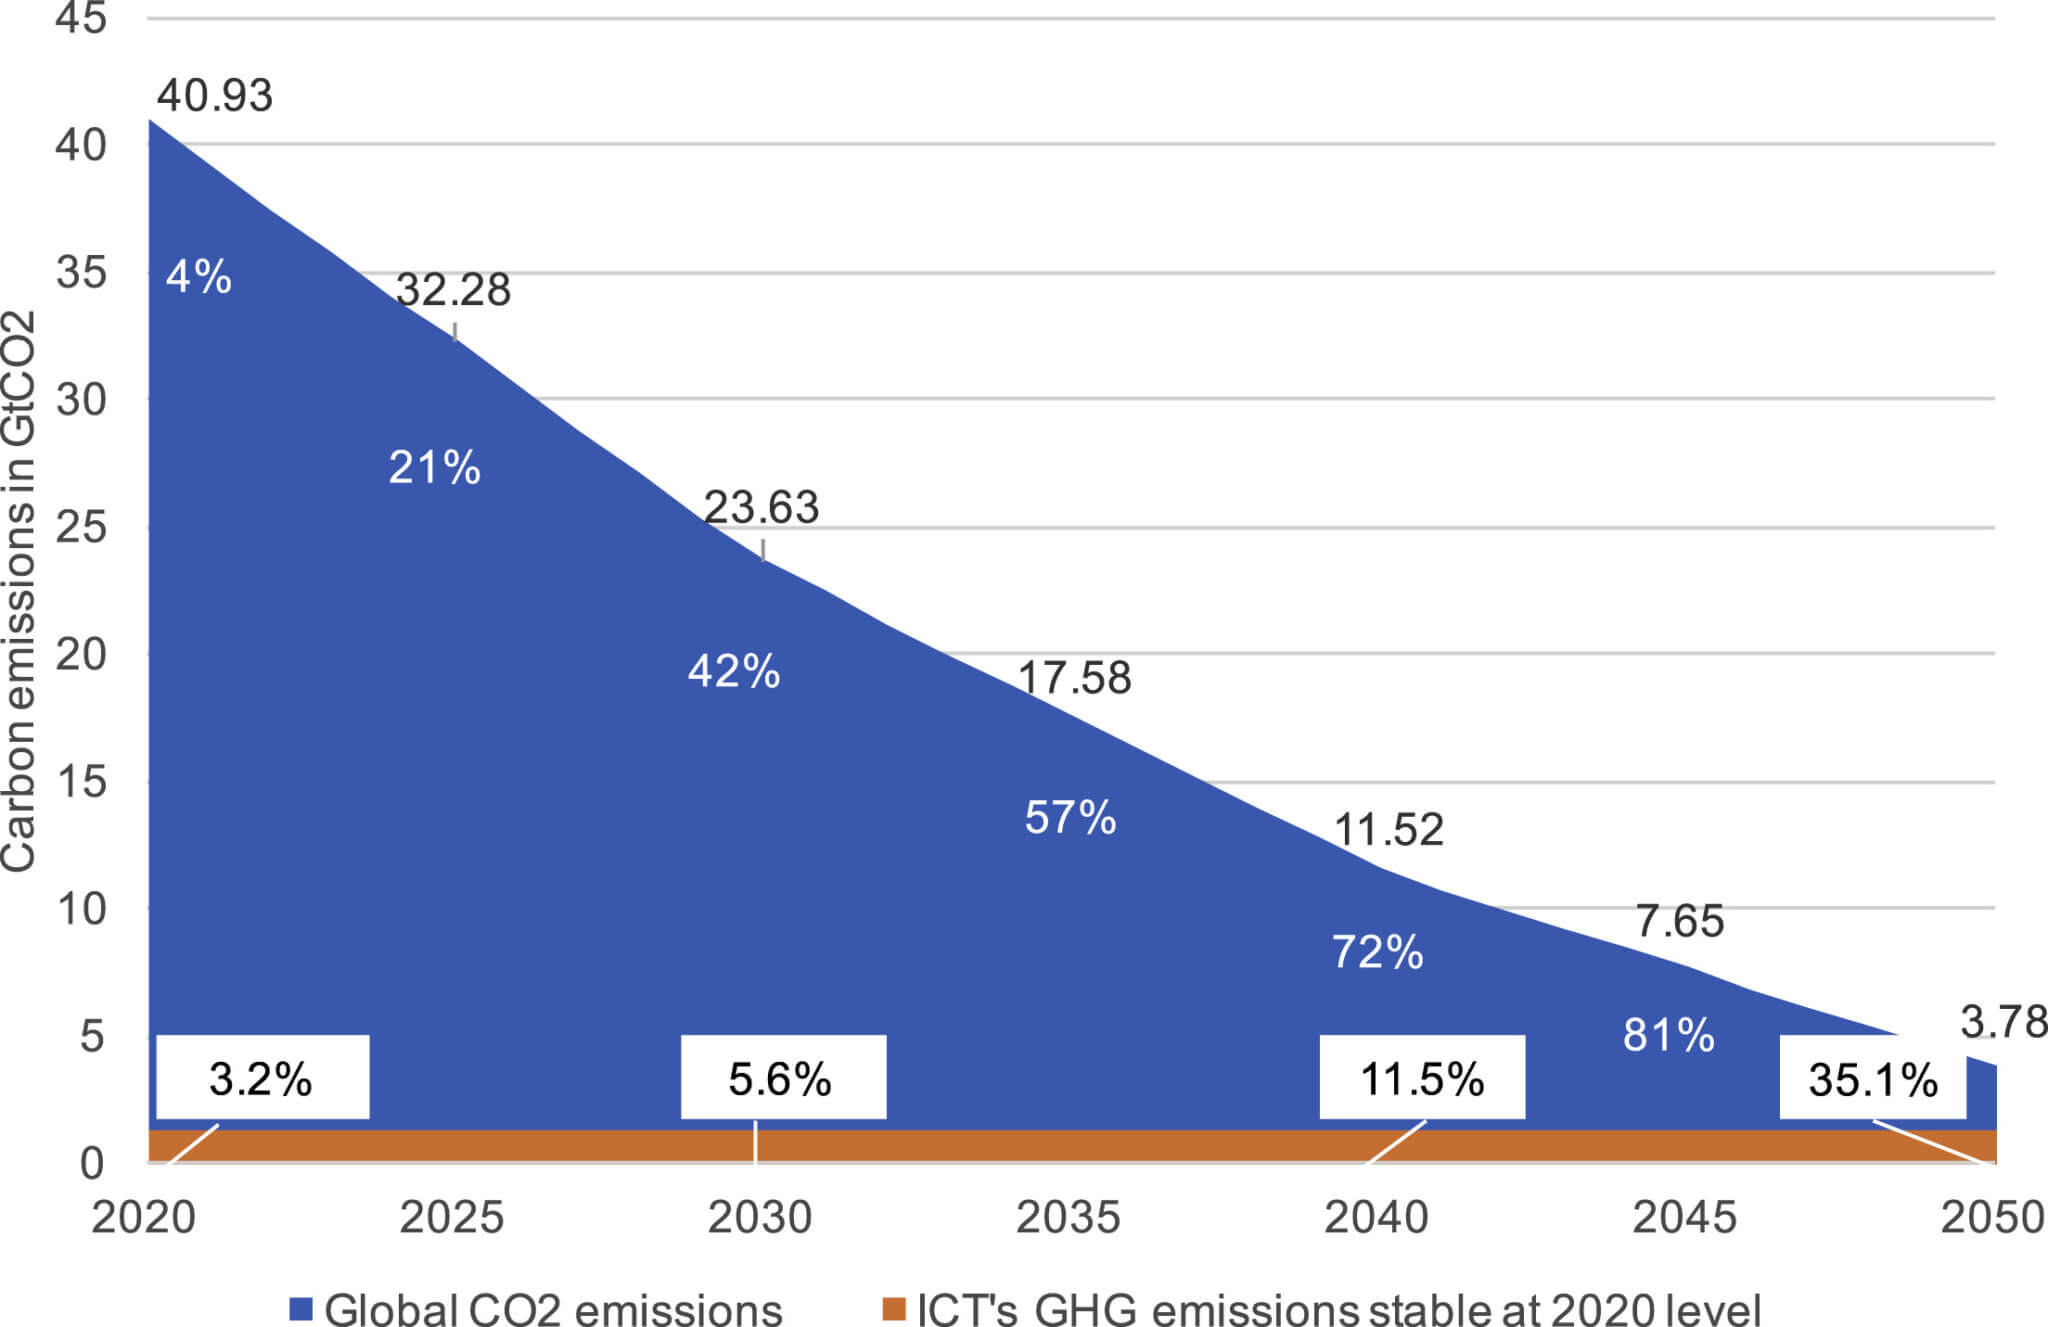 Graph showing Internet and ICT emissions from 2020 to 2050